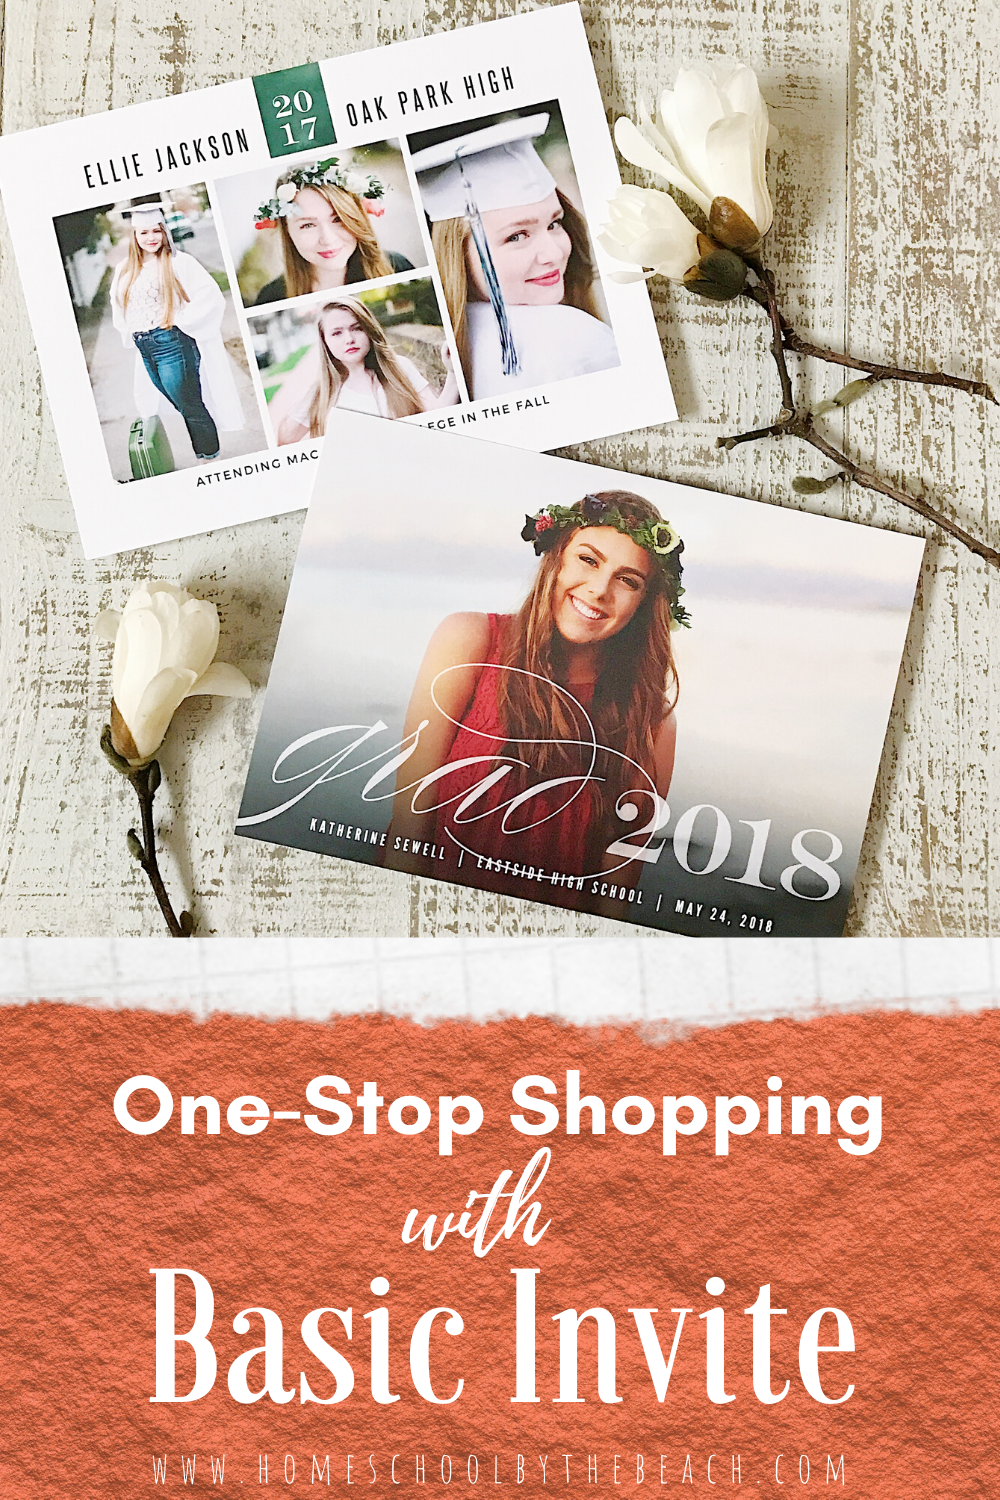 One-Stop Shopping with Basic Invite for your Stationery, Graduation Invitations, and More!